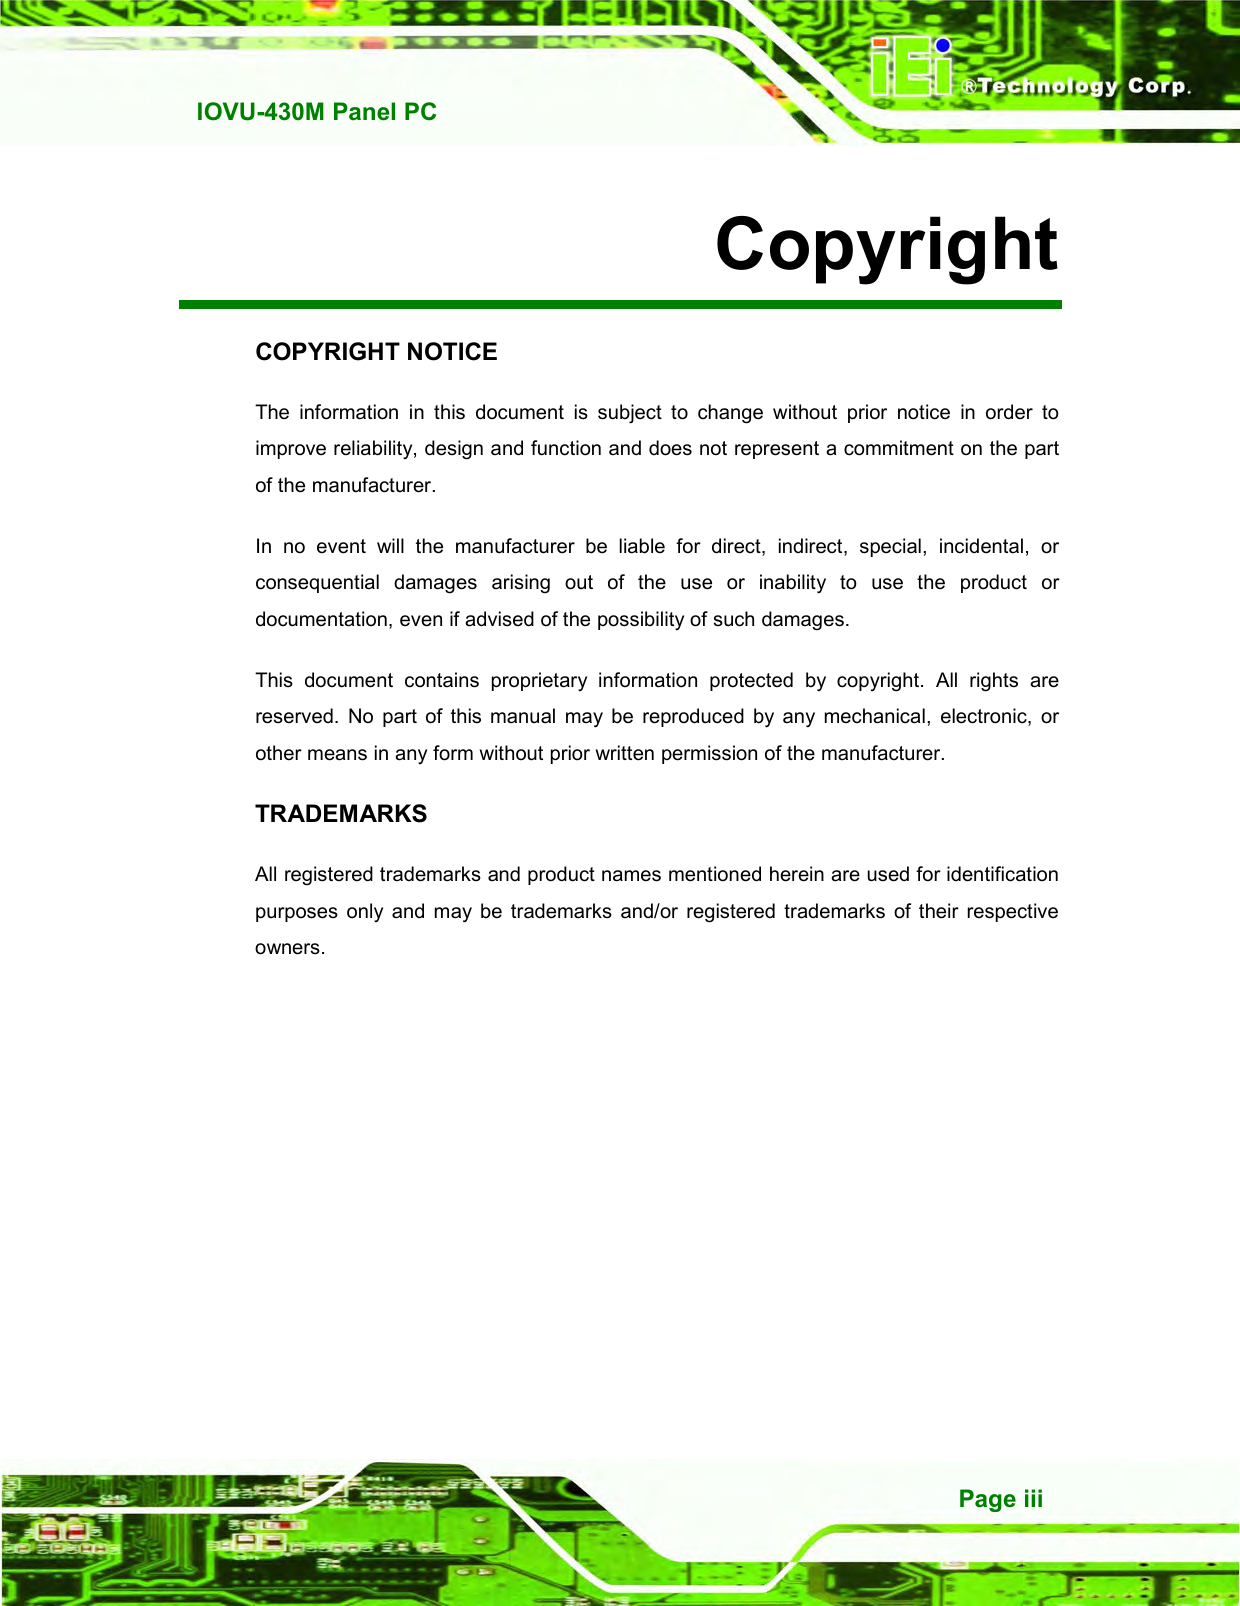   IOVU-430M Panel PC Page iii Copyright COPYRIGHT NOTICE The  information  in  this  document  is  subject  to  change  without  prior  notice  in  order  to improve reliability, design and function and does not represent a commitment on the part of the manufacturer. In  no  event  will  the  manufacturer  be  liable  for  direct,  indirect,  special,  incidental,  or consequential  damages  arising  out  of  the  use  or  inability  to  use  the  product  or documentation, even if advised of the possibility of such damages. This  document  contains  proprietary  information  protected  by  copyright.  All  rights  are reserved.  No  part  of this  manual  may  be  reproduced  by  any  mechanical,  electronic,  or other means in any form without prior written permission of the manufacturer. TRADEMARKS All registered trademarks and product names mentioned herein are used for identification purposes  only  and  may  be  trademarks  and/or  registered  trademarks  of  their  respective owners. 